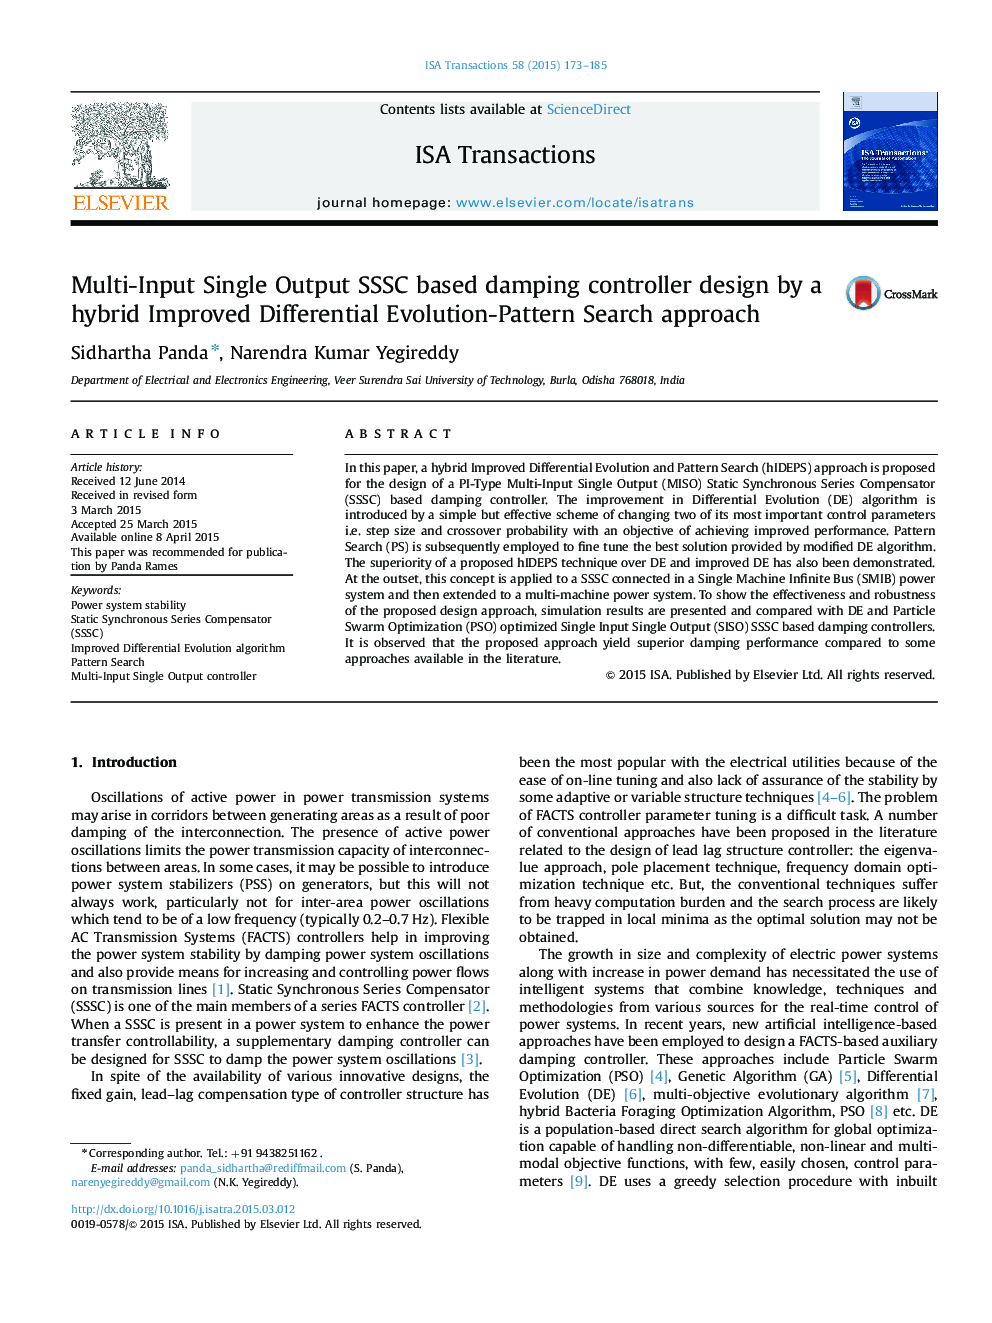 Research ArticleMulti-Input Single Output SSSC based damping controller design by a hybrid Improved Differential Evolution-Pattern Search approach